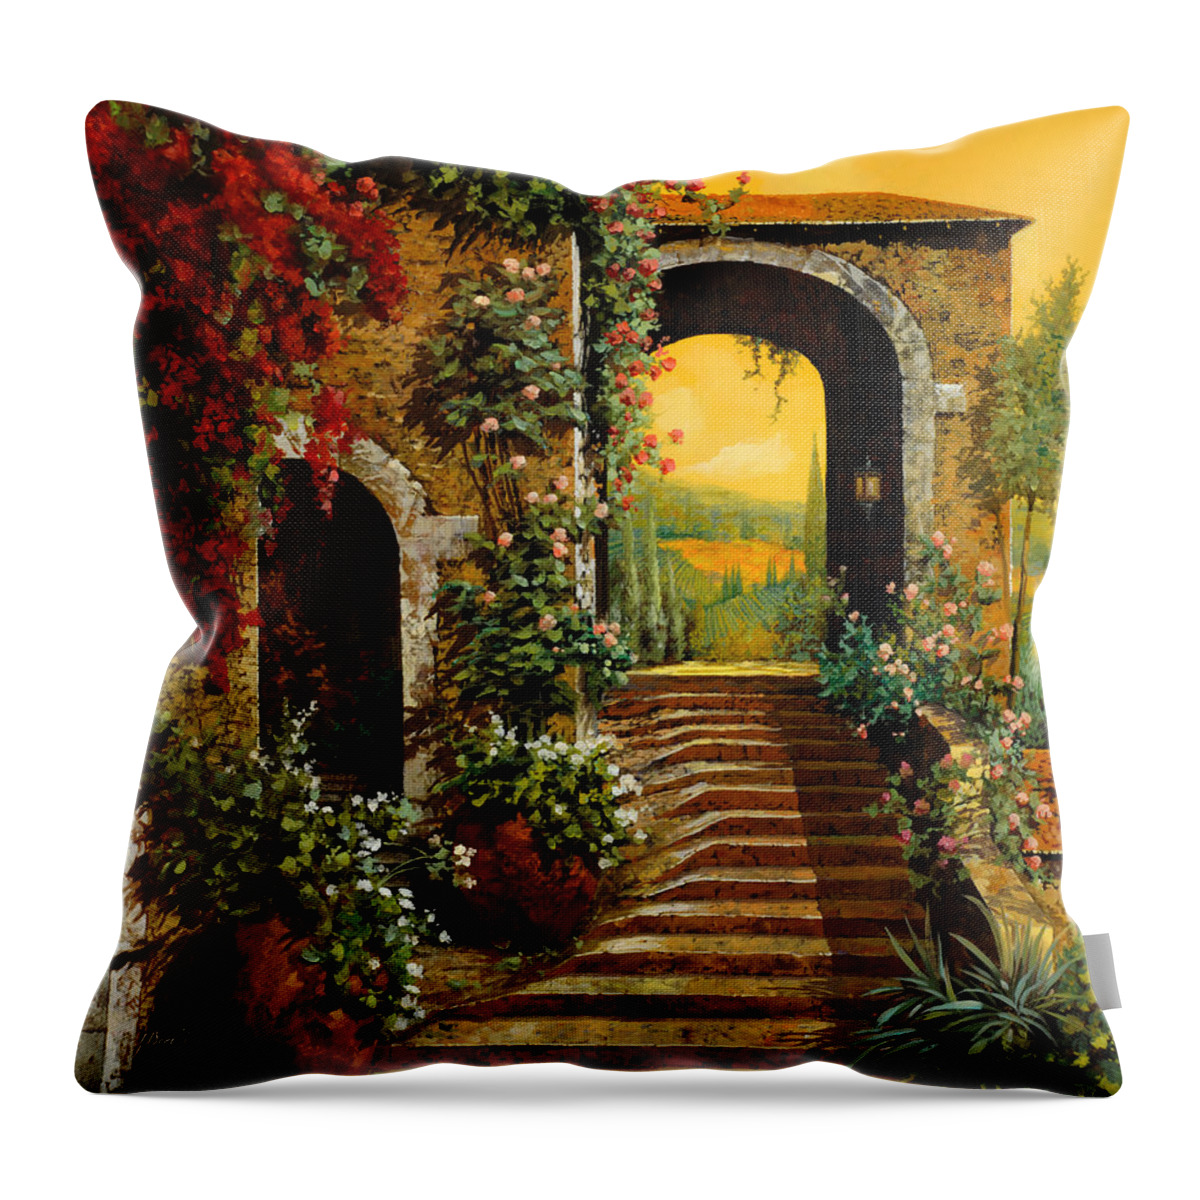 Archlandscapeguido Borelliorange Skytuscanywinevineyardfinr Artoilcanvasyellow Skymade In Italy Throw Pillow featuring the painting Le Scale E Il Cielo Giallo by Guido Borelli